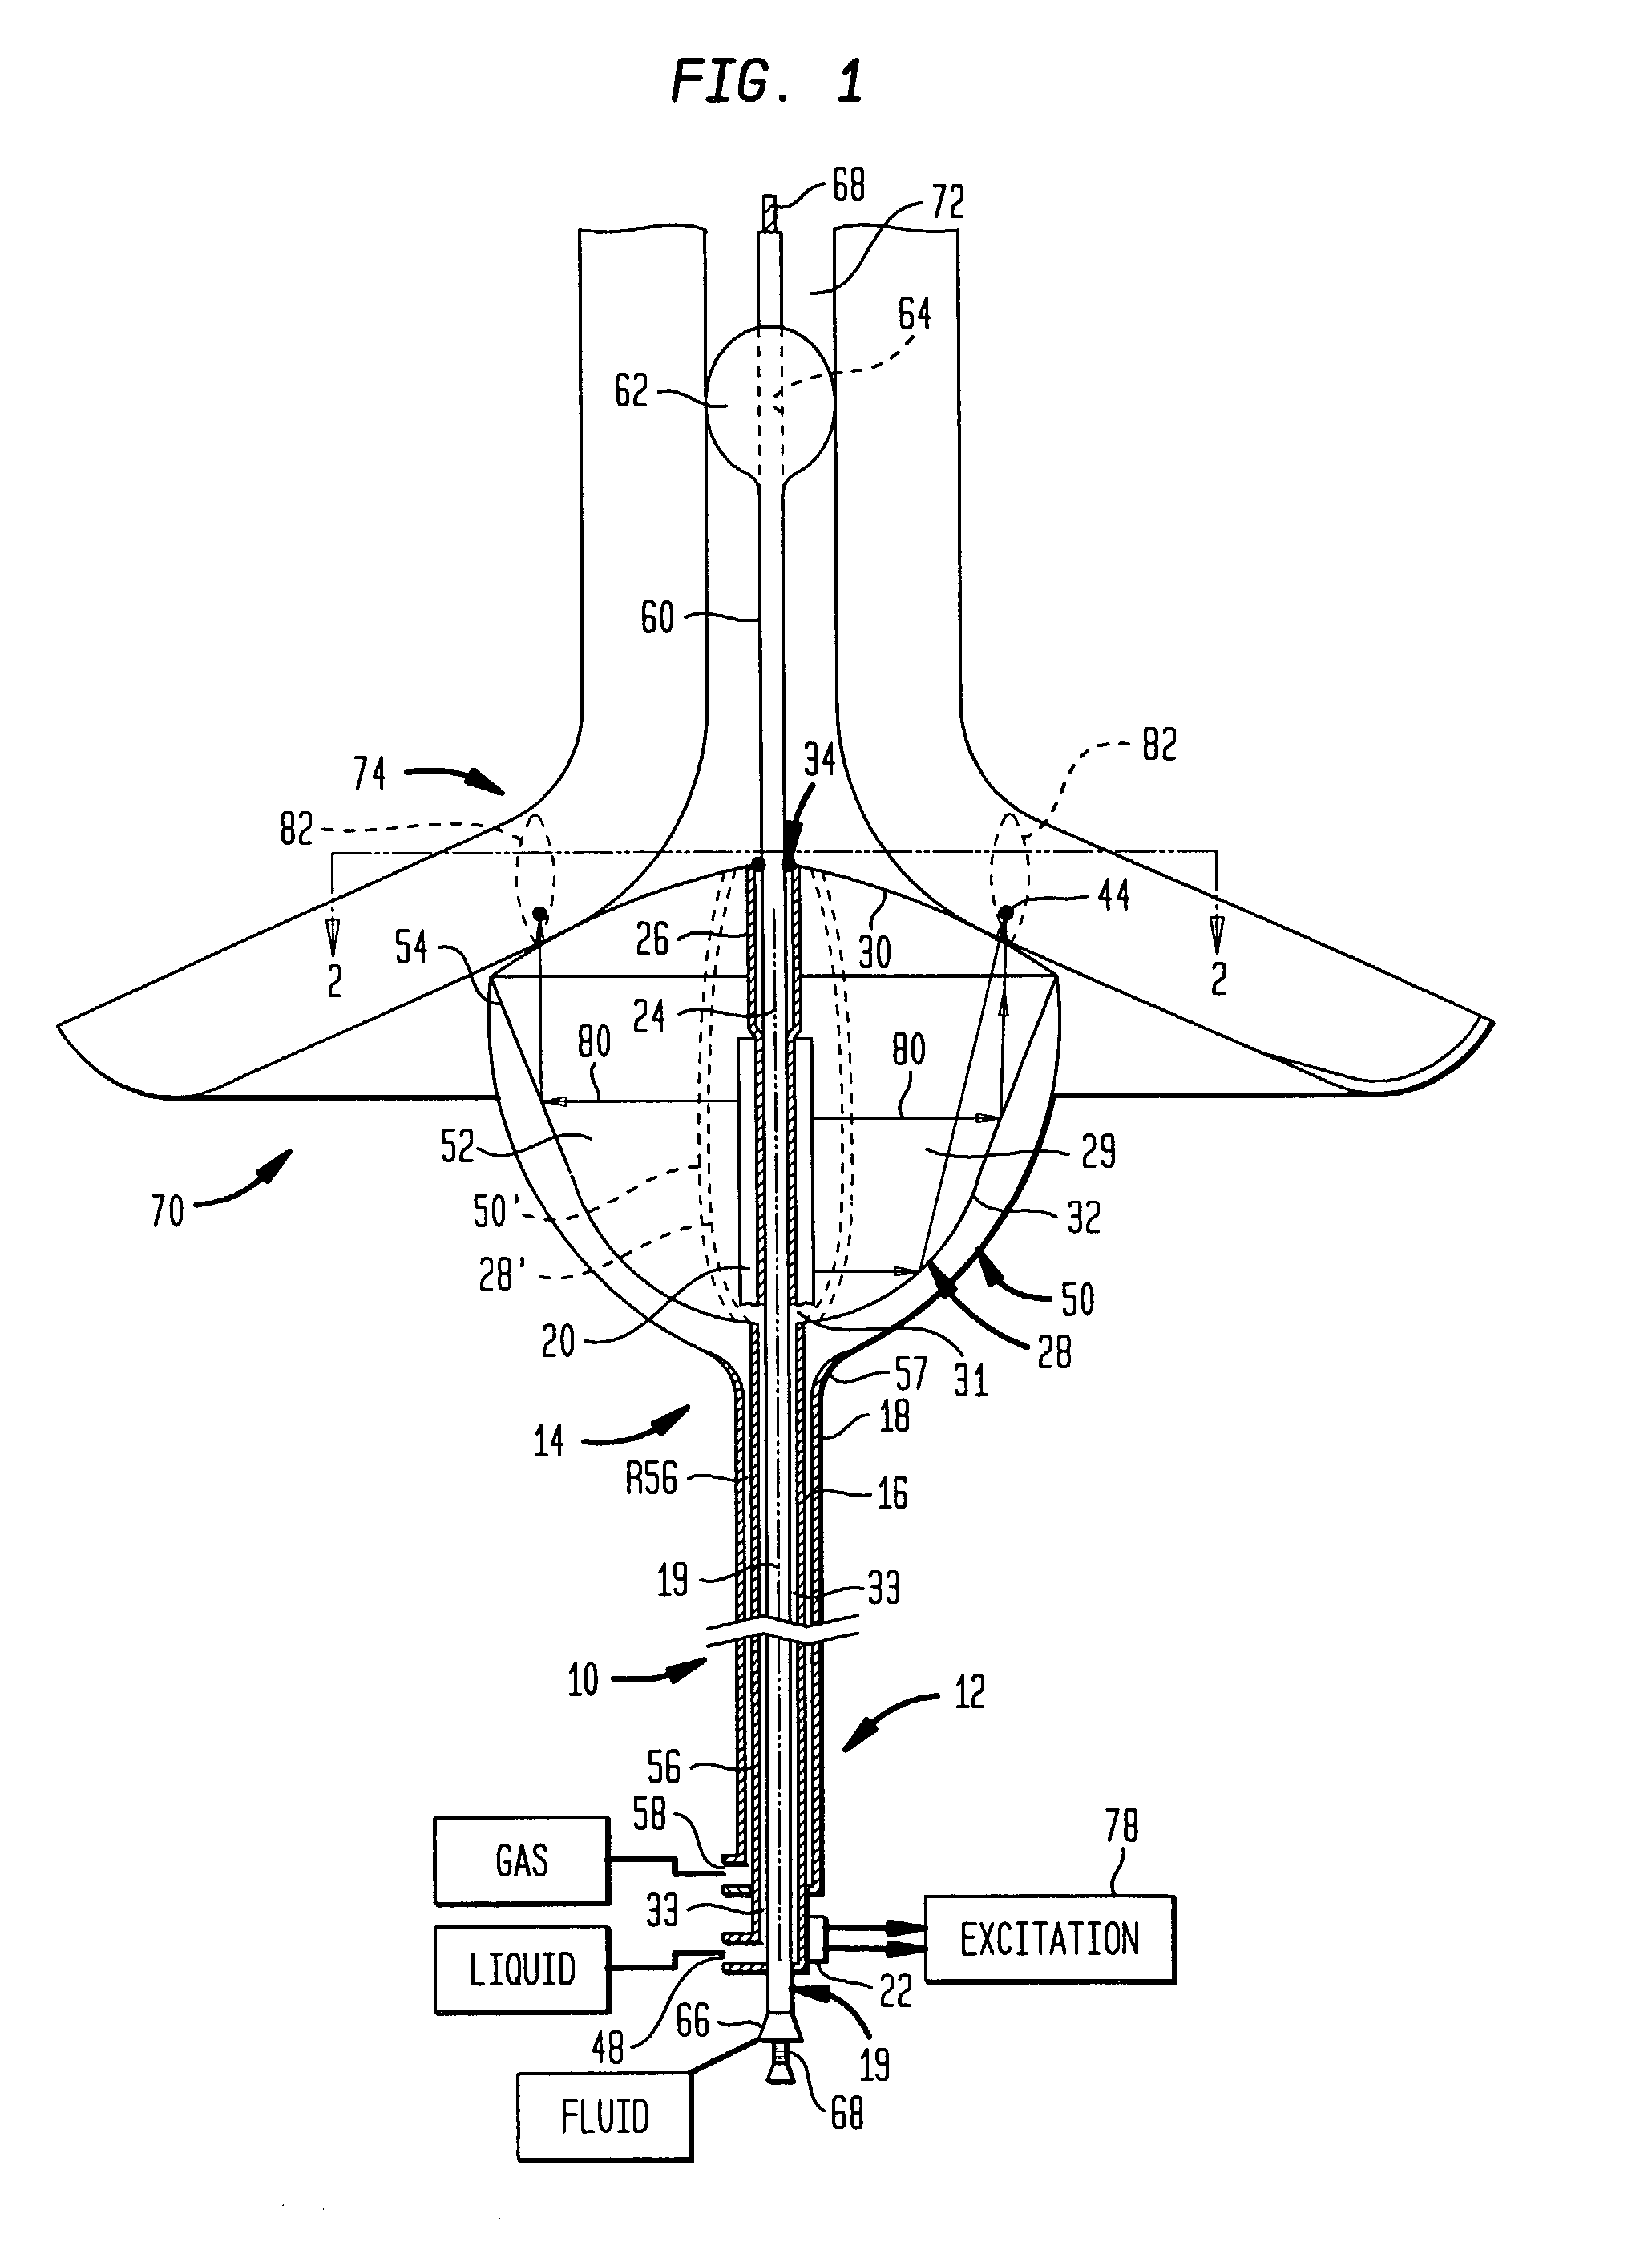 Thermal treatment methods and apparatus with focused energy application